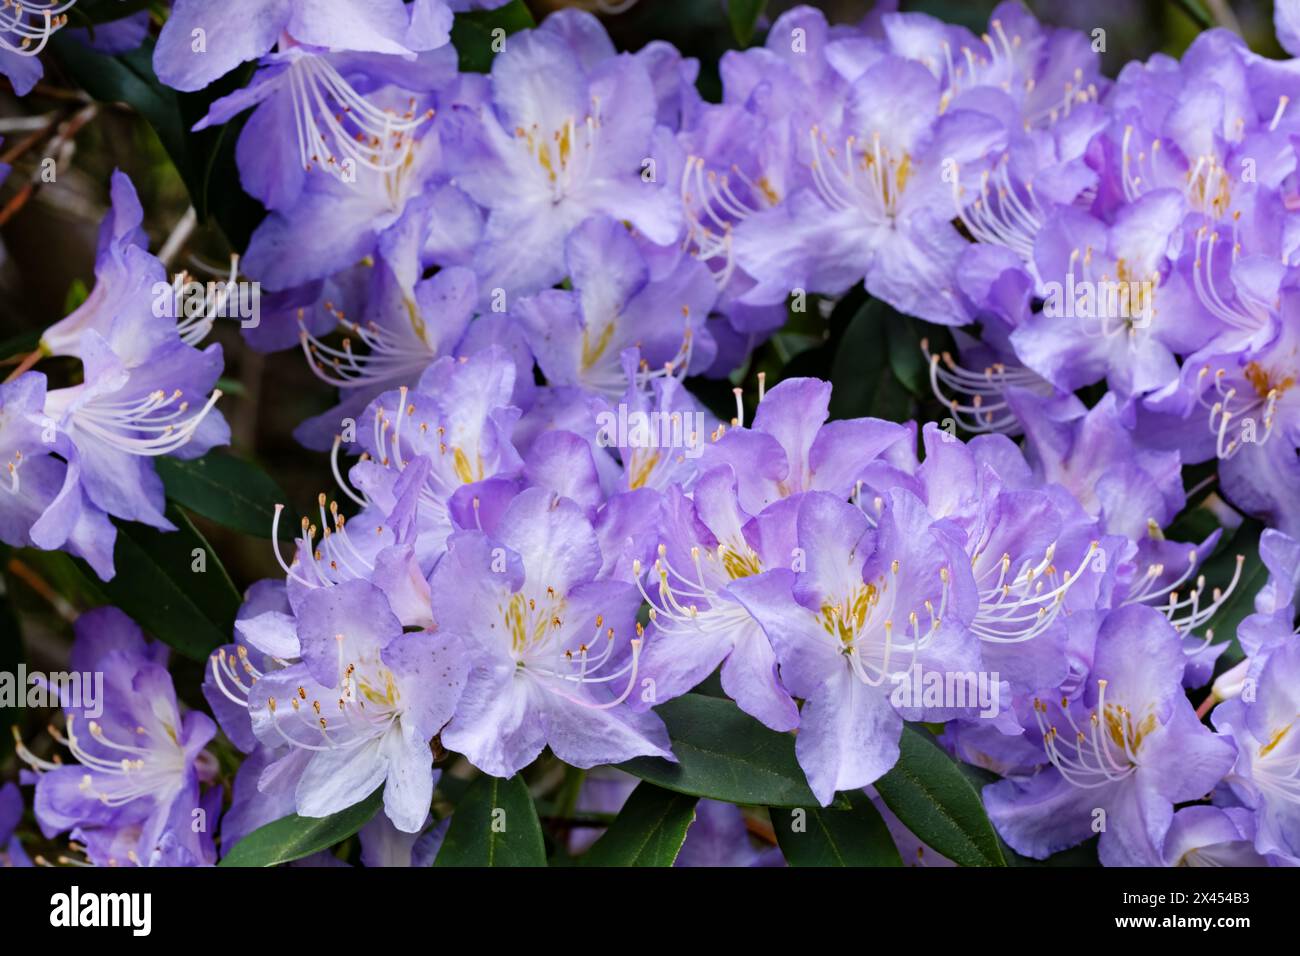 UK. A large blue Rhododendron shrub in early spring flower. The plant is covered in spectacular blue flowerheads Stock Photo